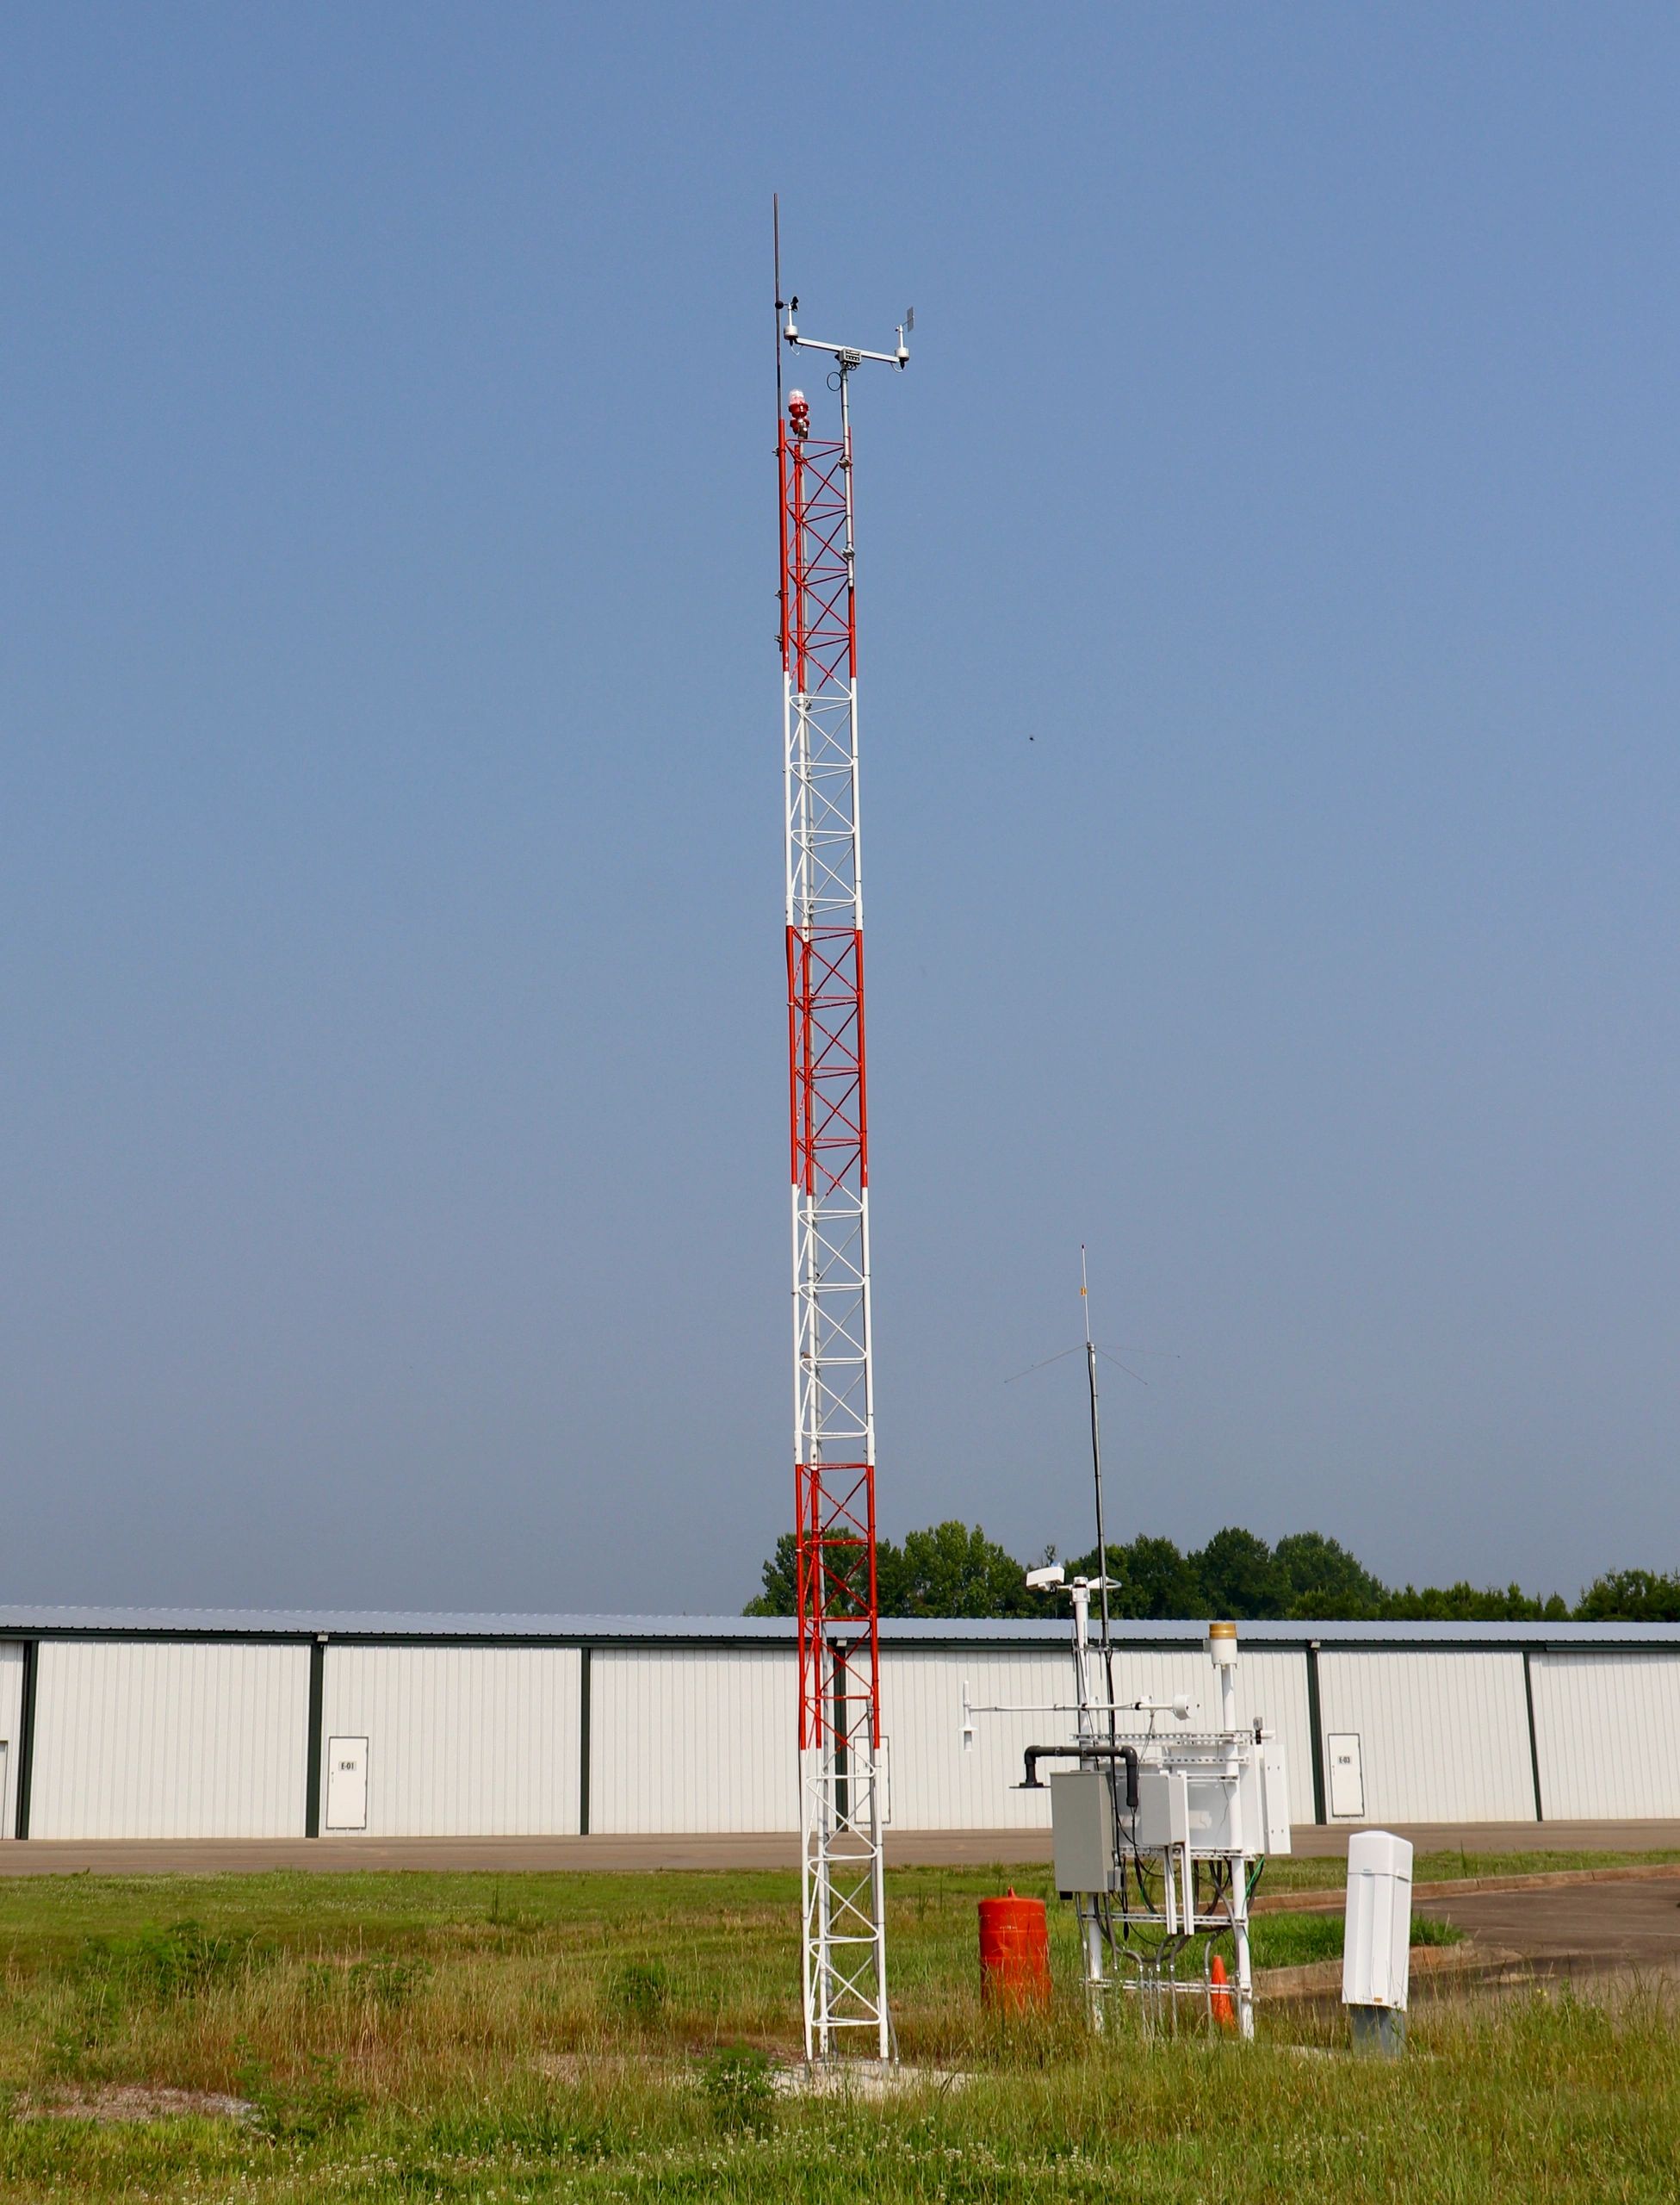 Photograph of an antenna at the airport.